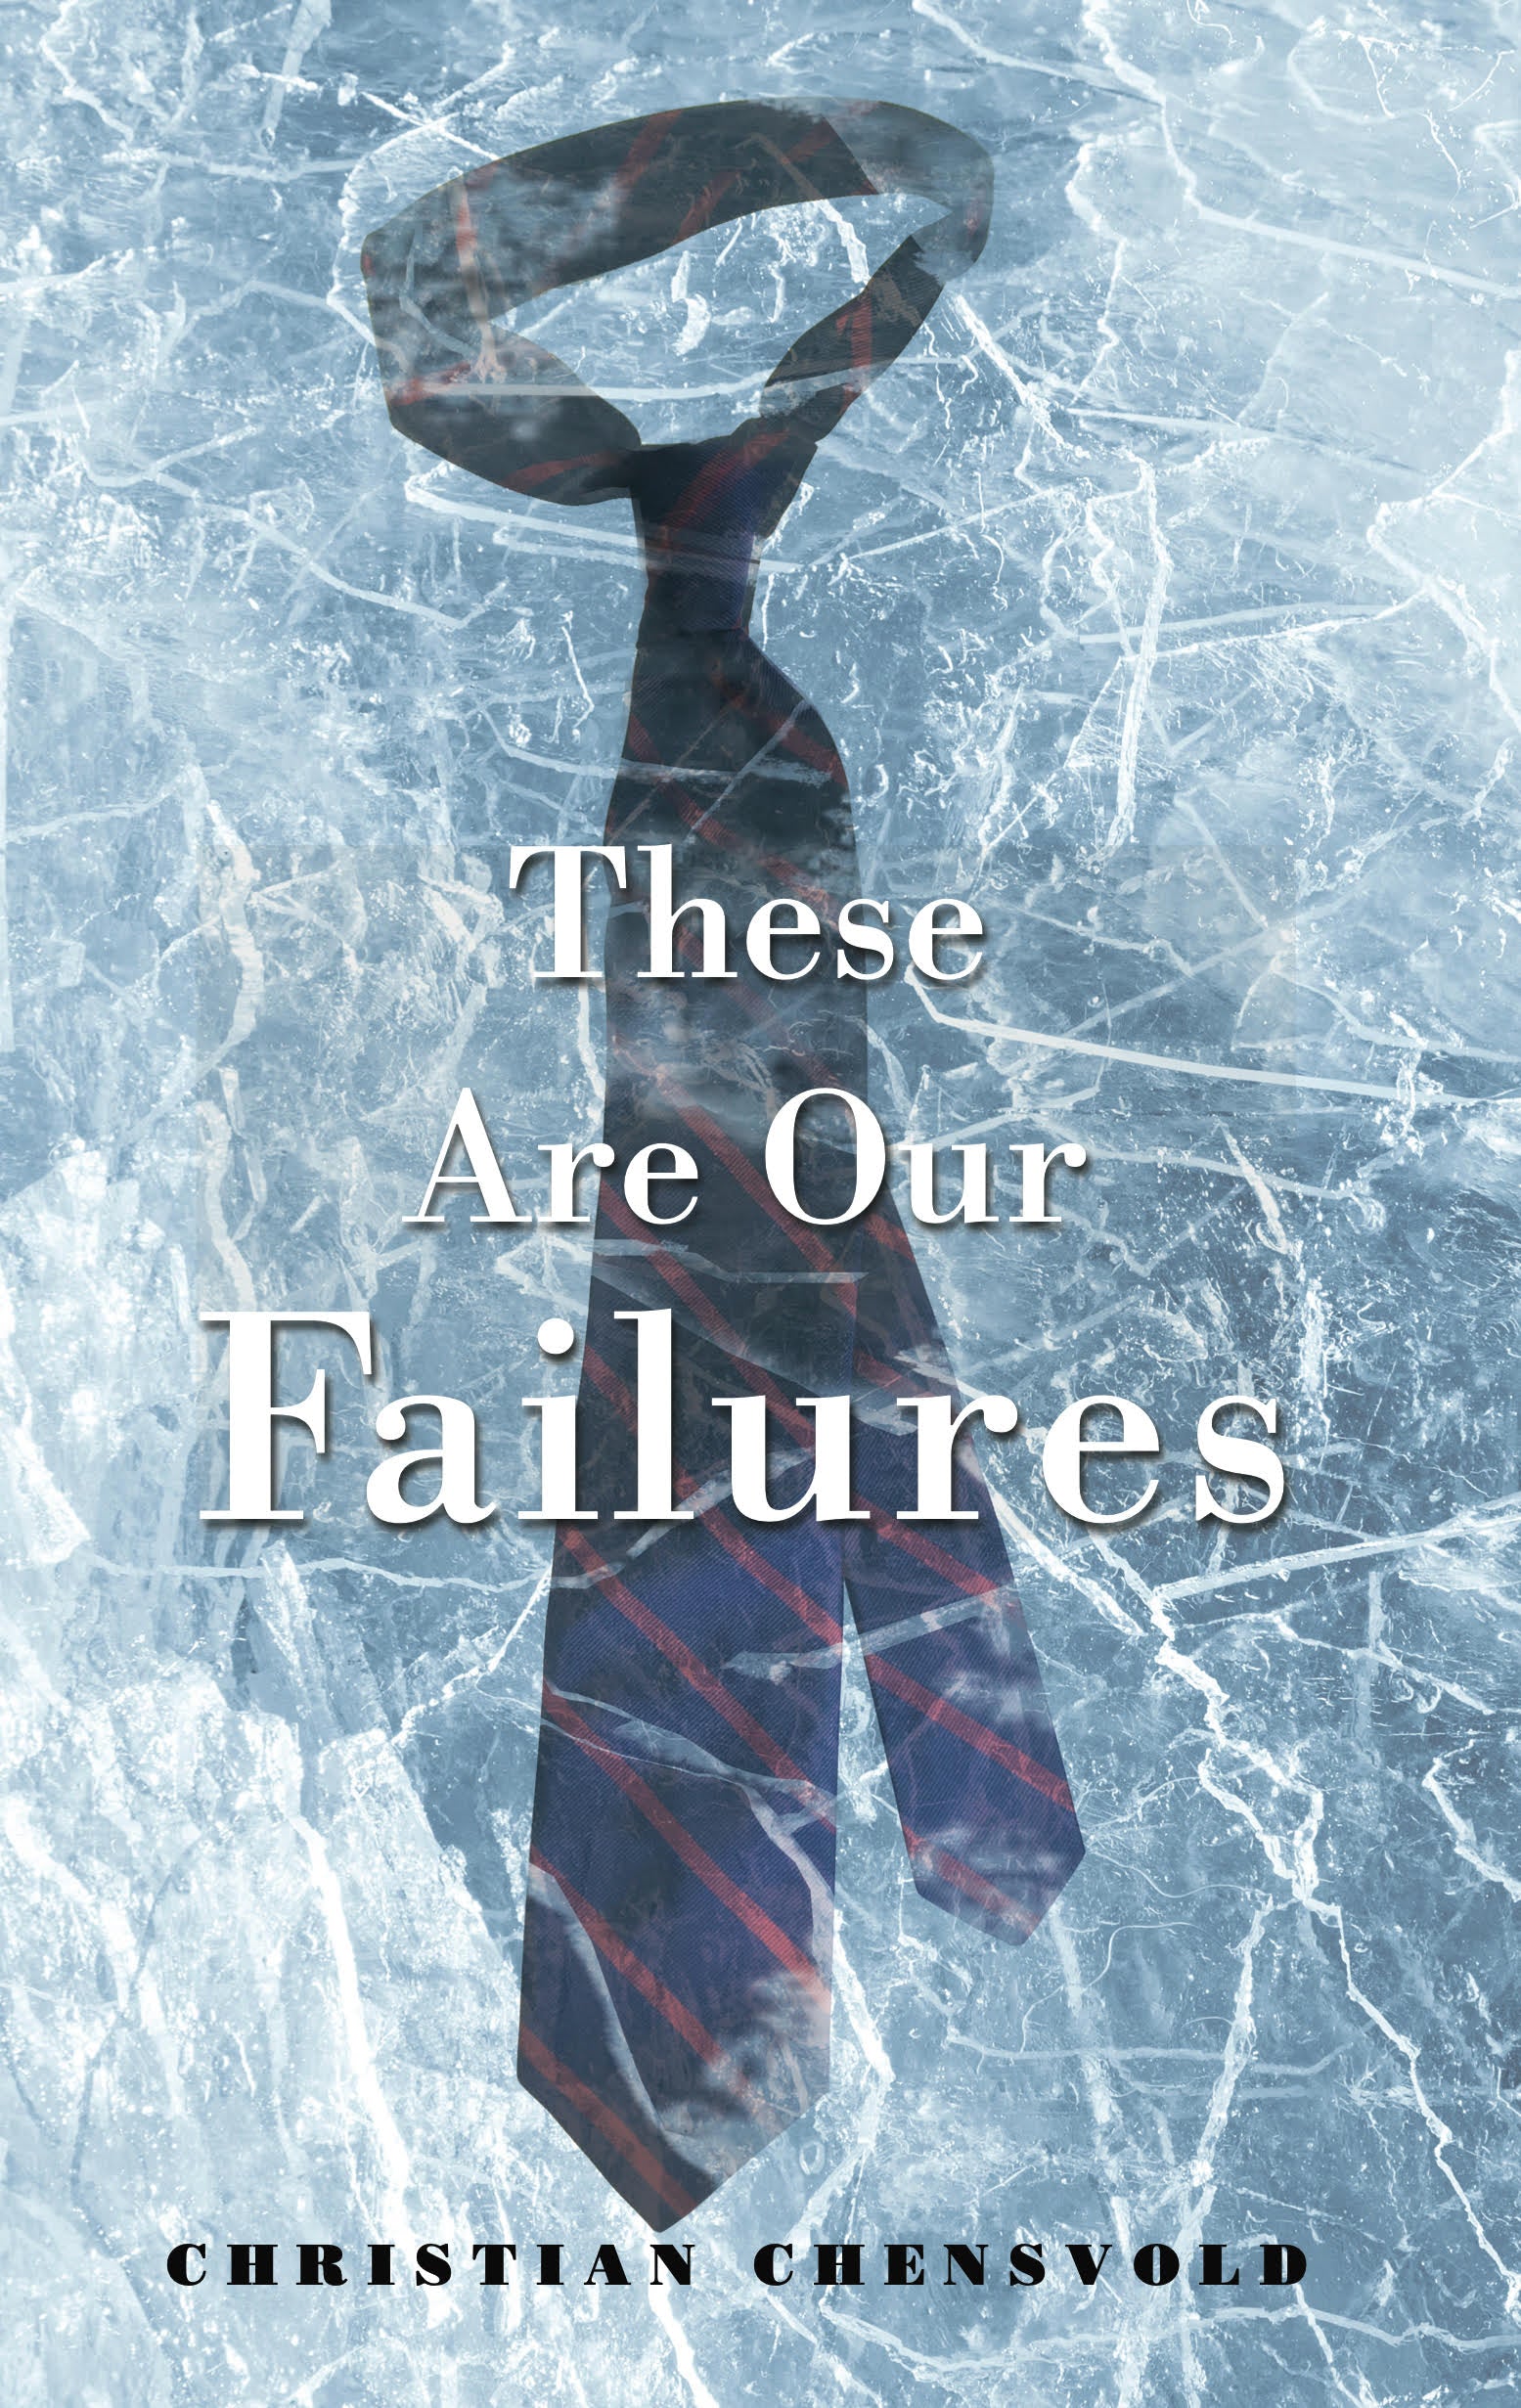 These Are Our Failures by Christian Chensvold